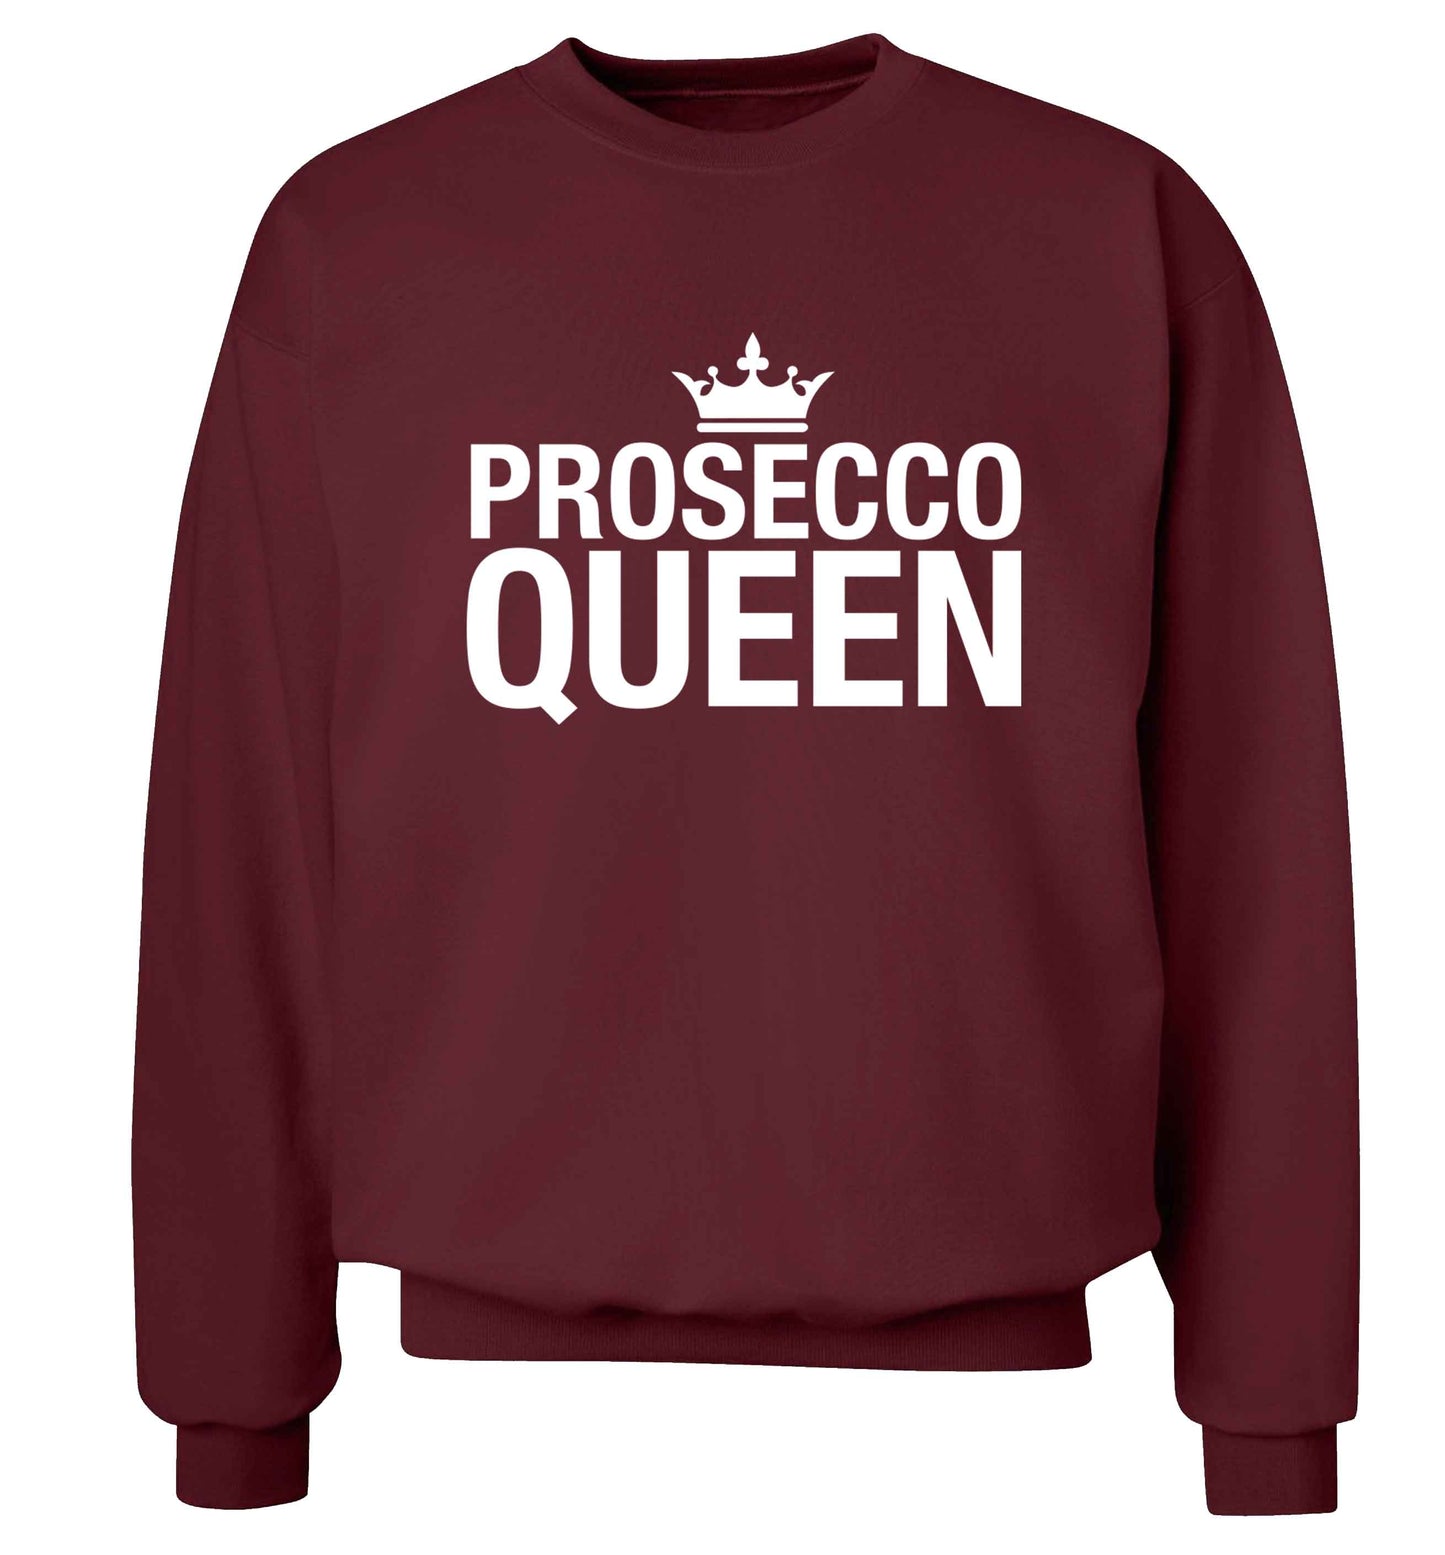 Prosecco queen Adult's unisex maroon Sweater 2XL